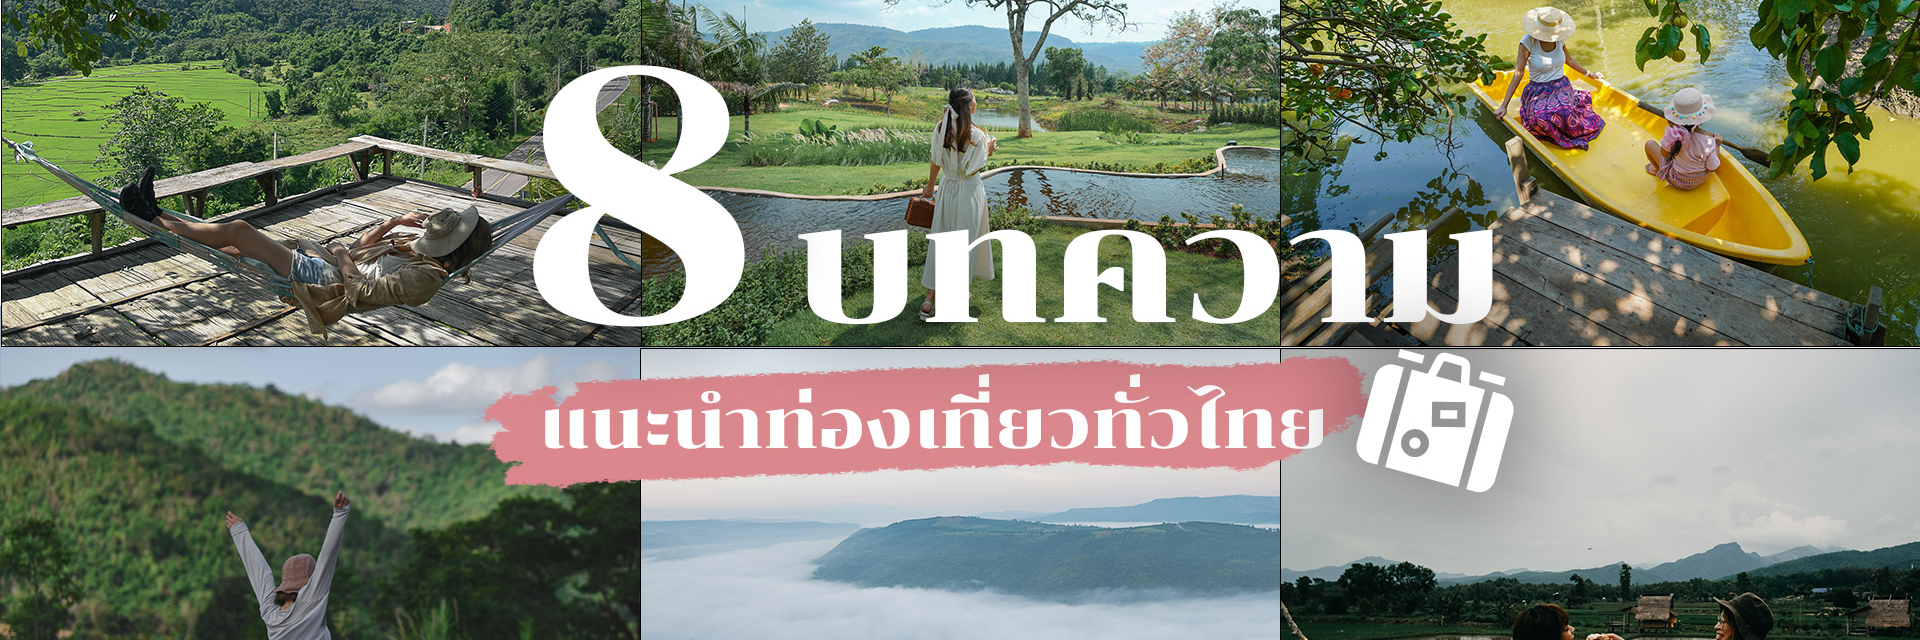 8 articles recommended traveling around Thailand